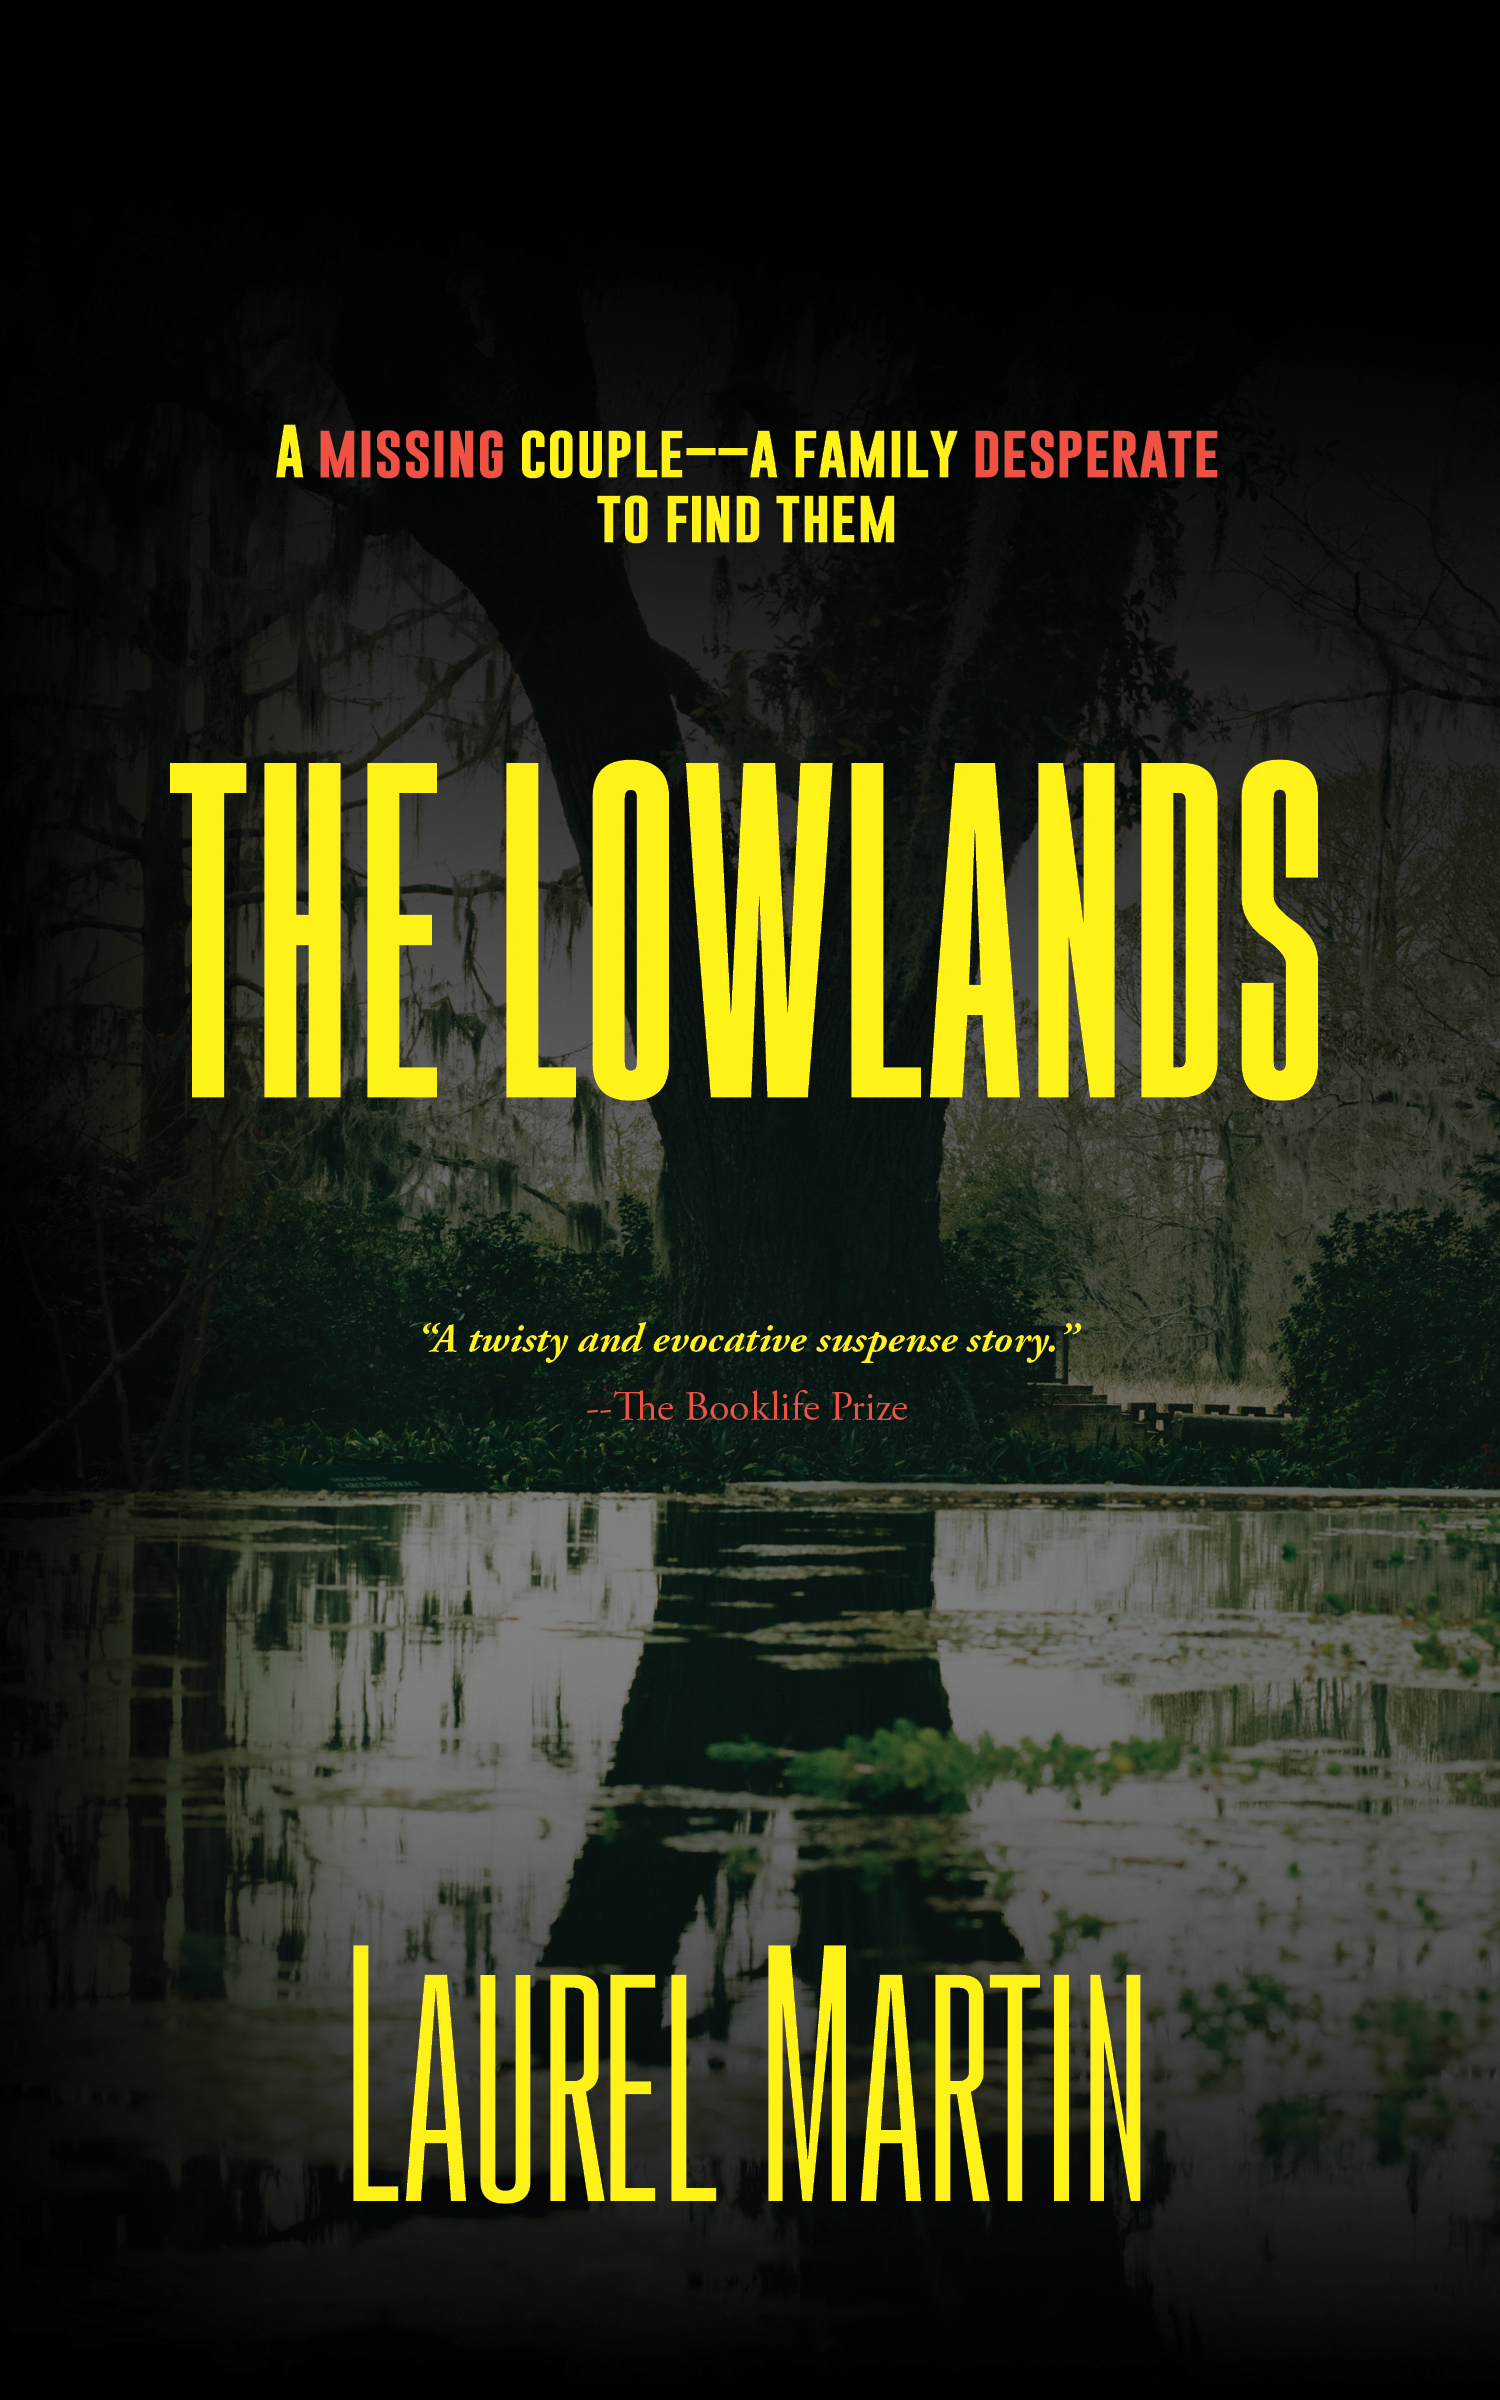 FREE: The Lowlands, A Missing Couple—A Family Desperate to Find Them by Laurel Martin